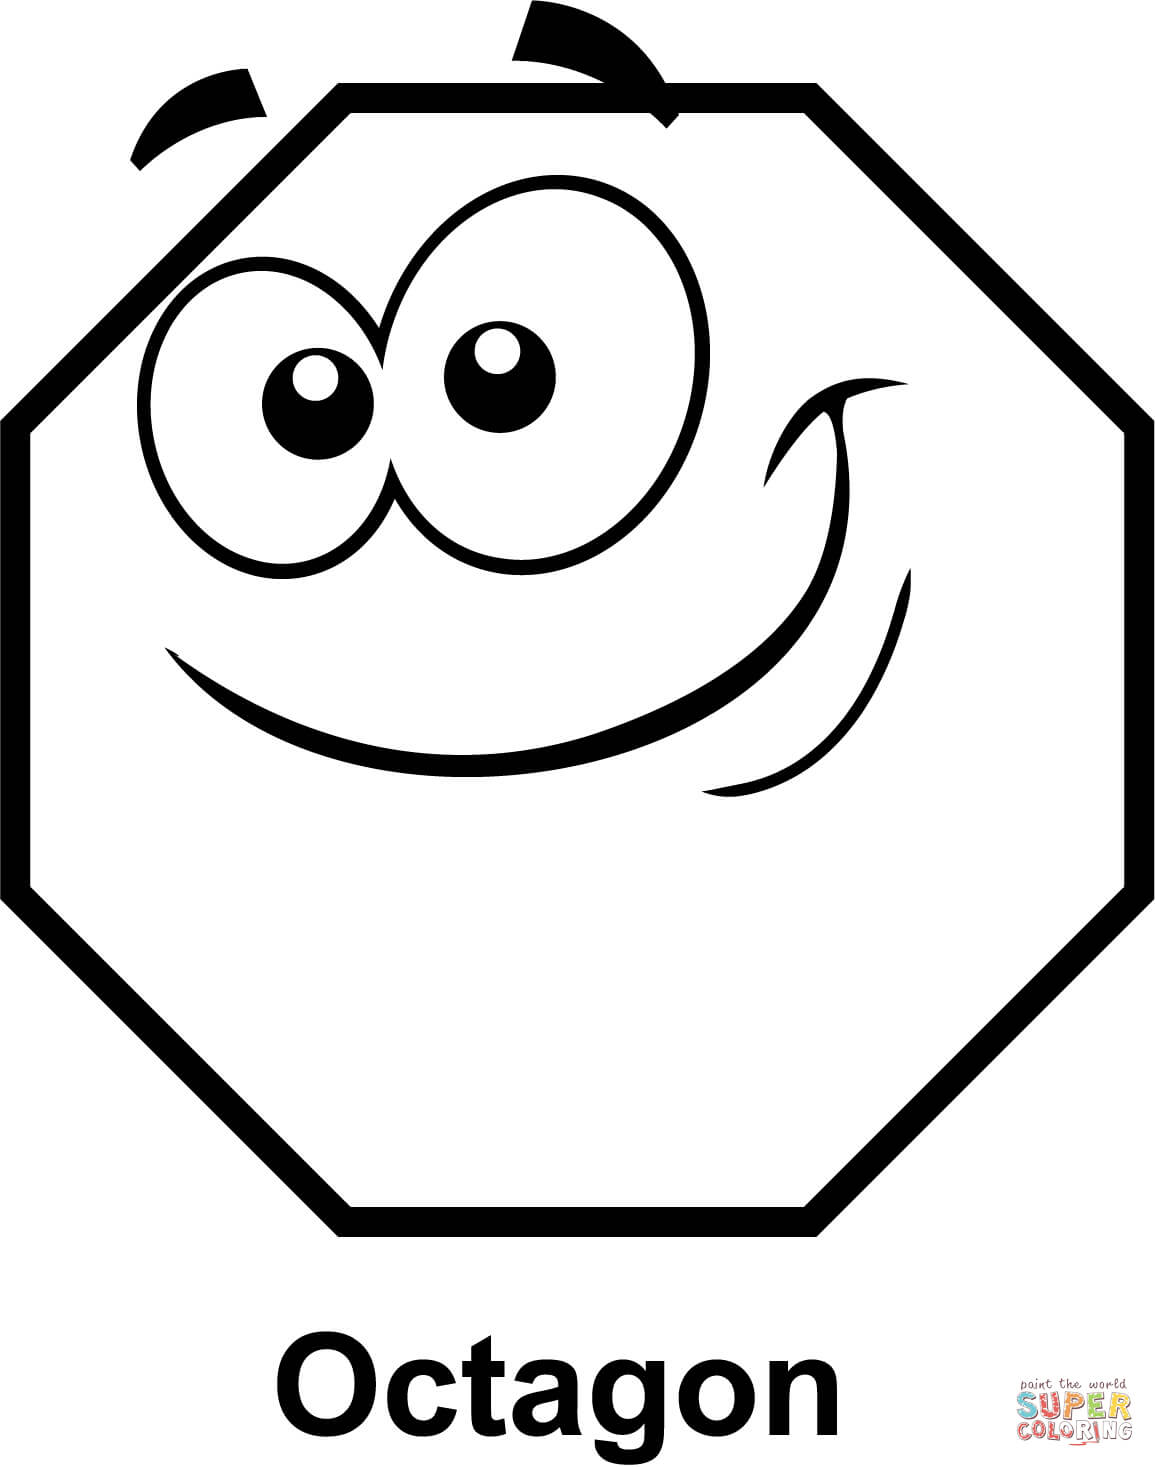 Octagon with cartoon face coloring page free printable coloring pages